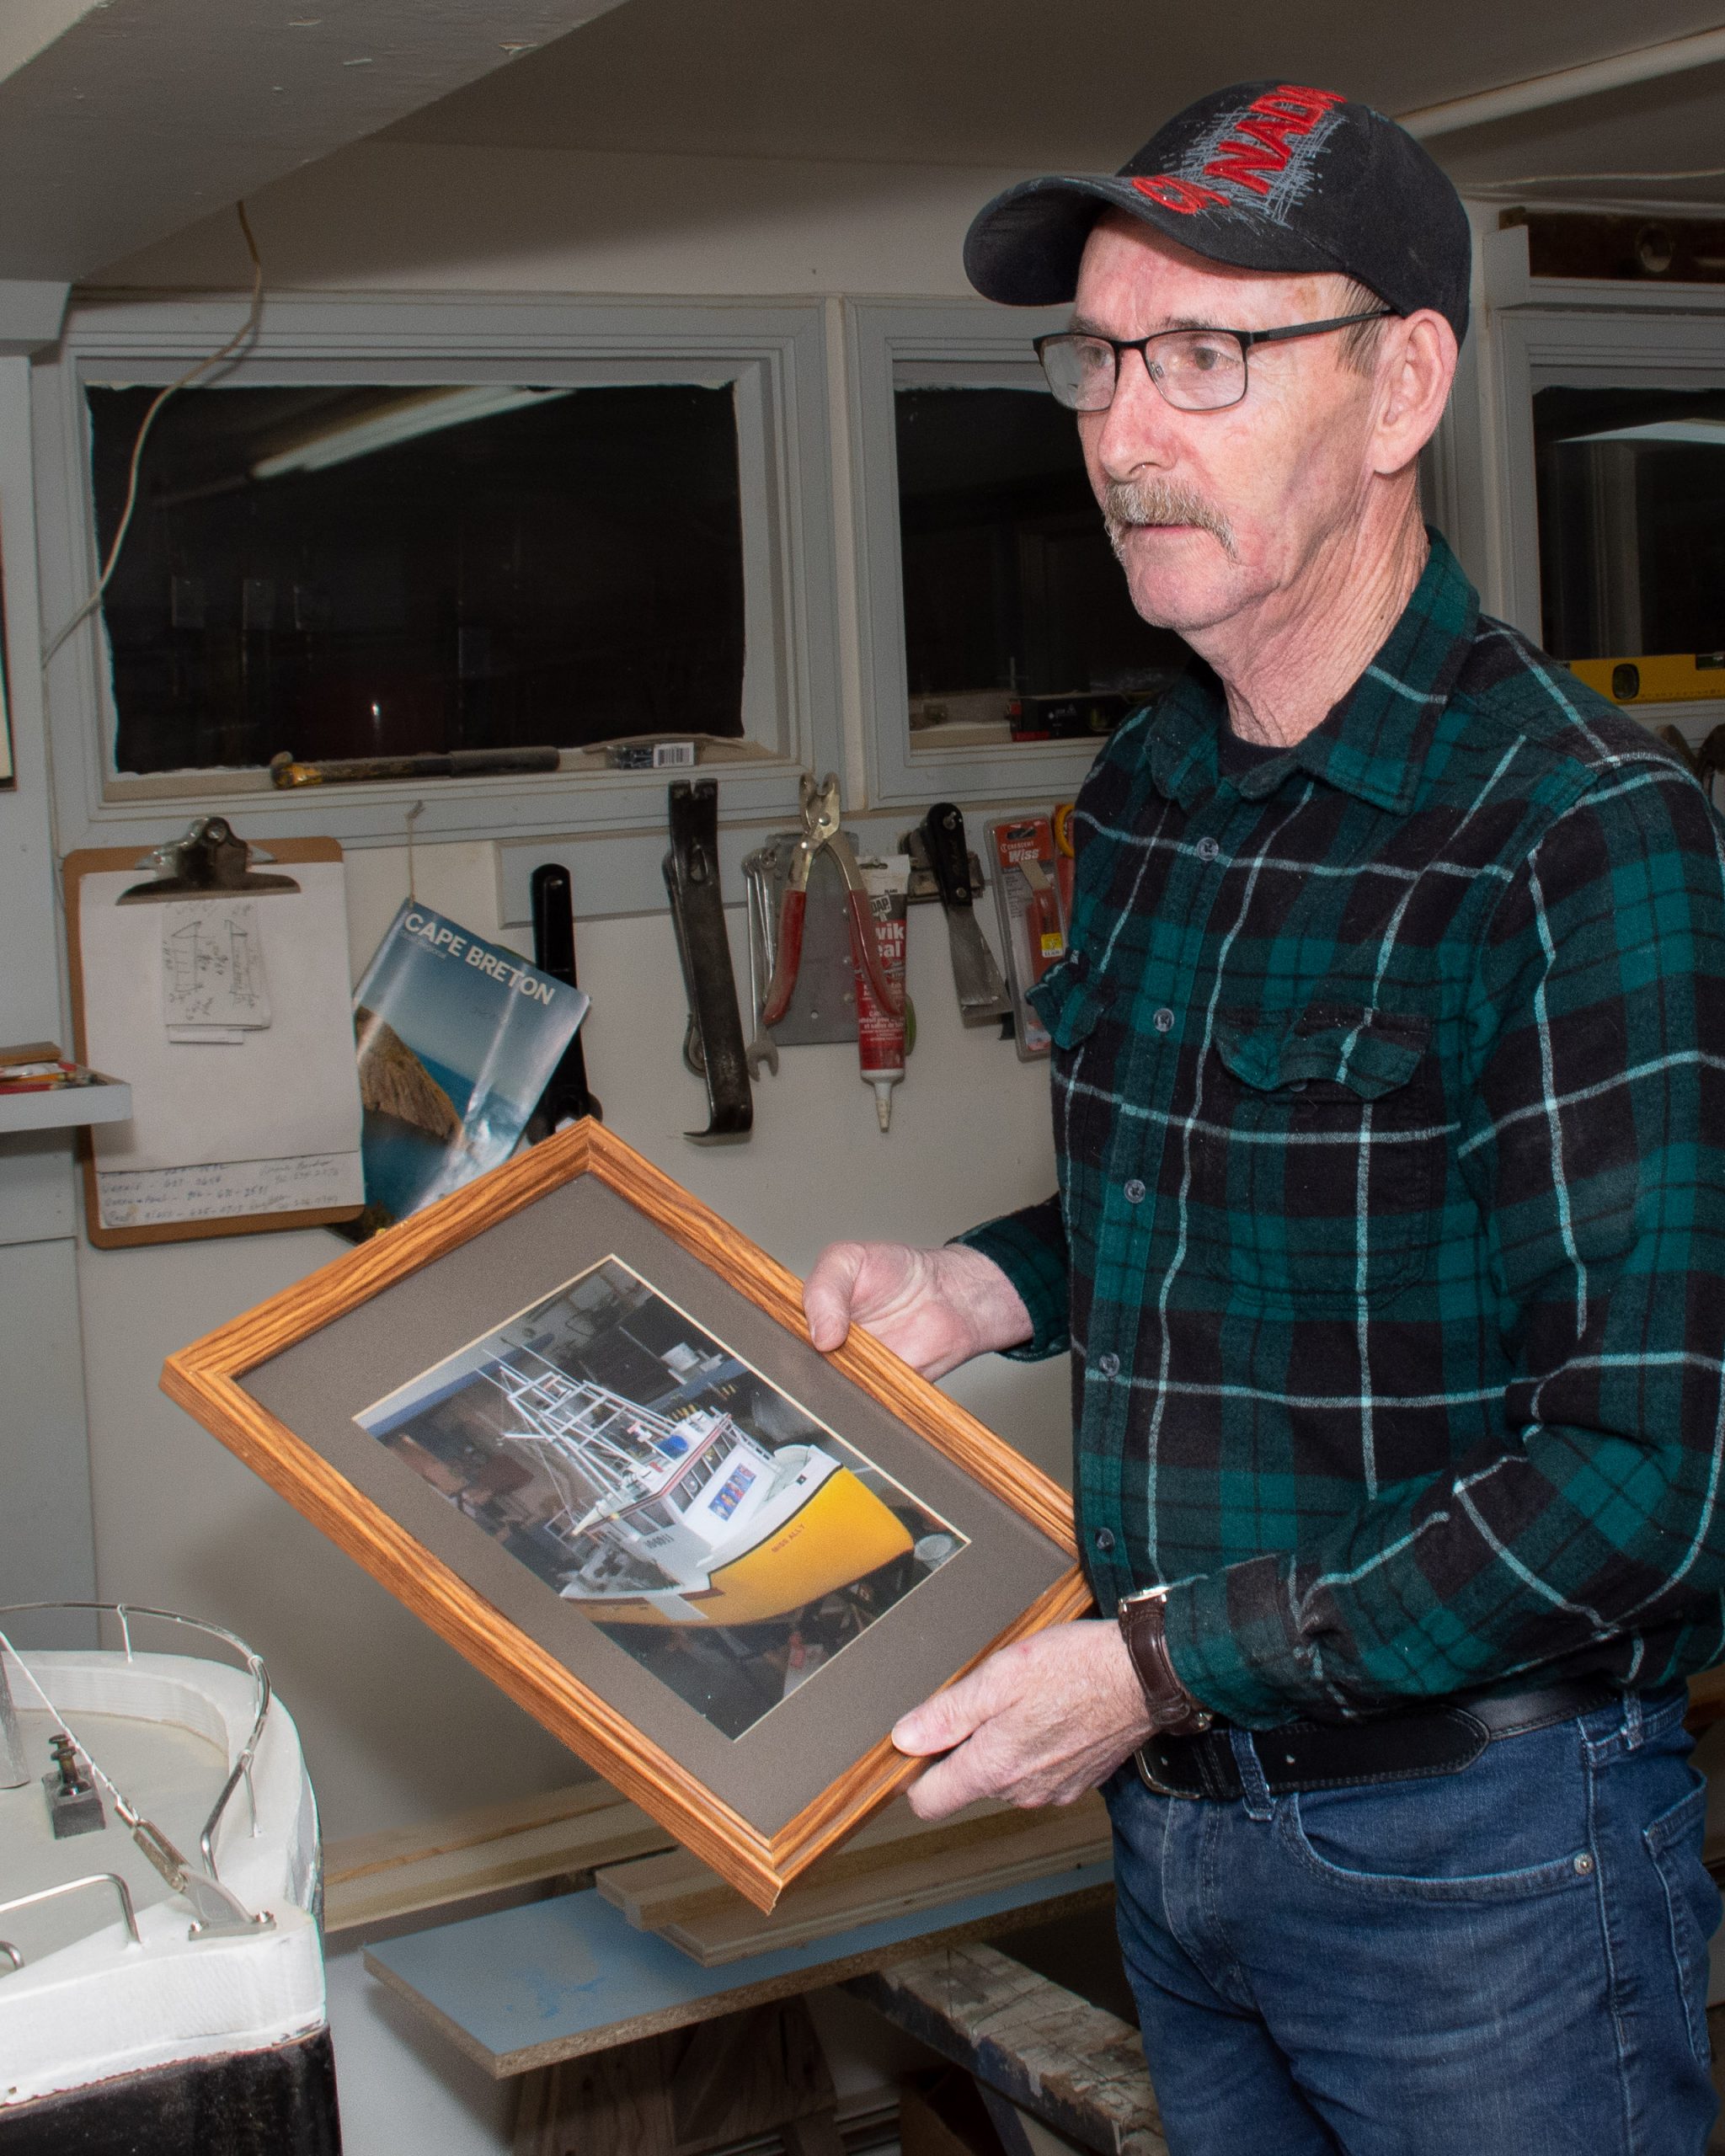 Kevin's model of the Miss Ally that sunk off Nova Scotia about 120 km southeast of Liverpool, Nova Scotia. Kevin donated the boat to raise money for the IWK.